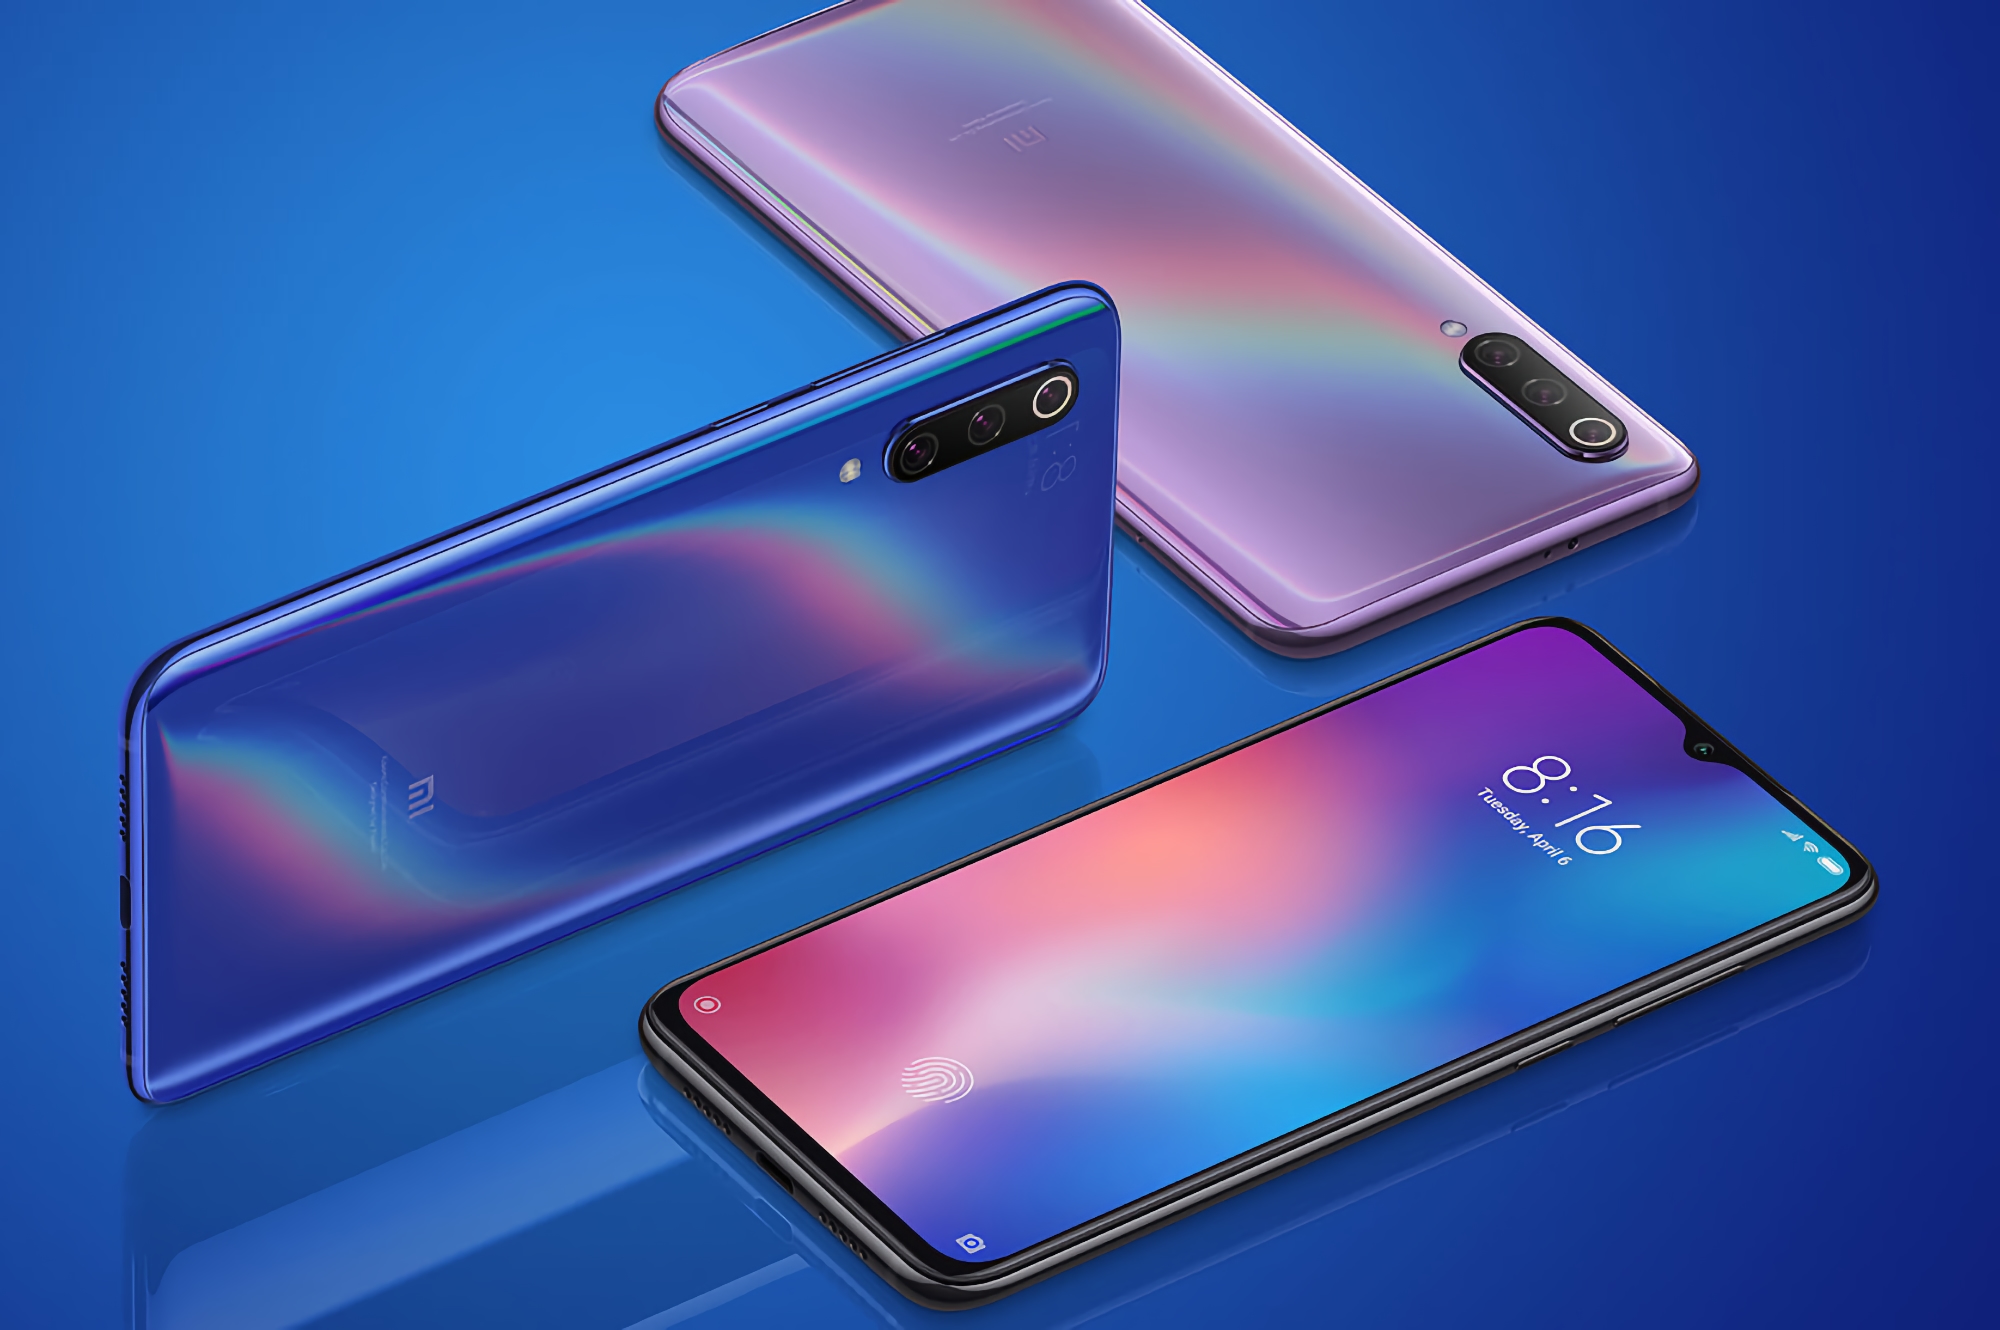 Redmi Note 8, Redmi Note 8 Pro, Xiaomi Mi 9, Xiaomi Mi 9 SE and five other smartphones from the company are unlikely to update to MIUI 13